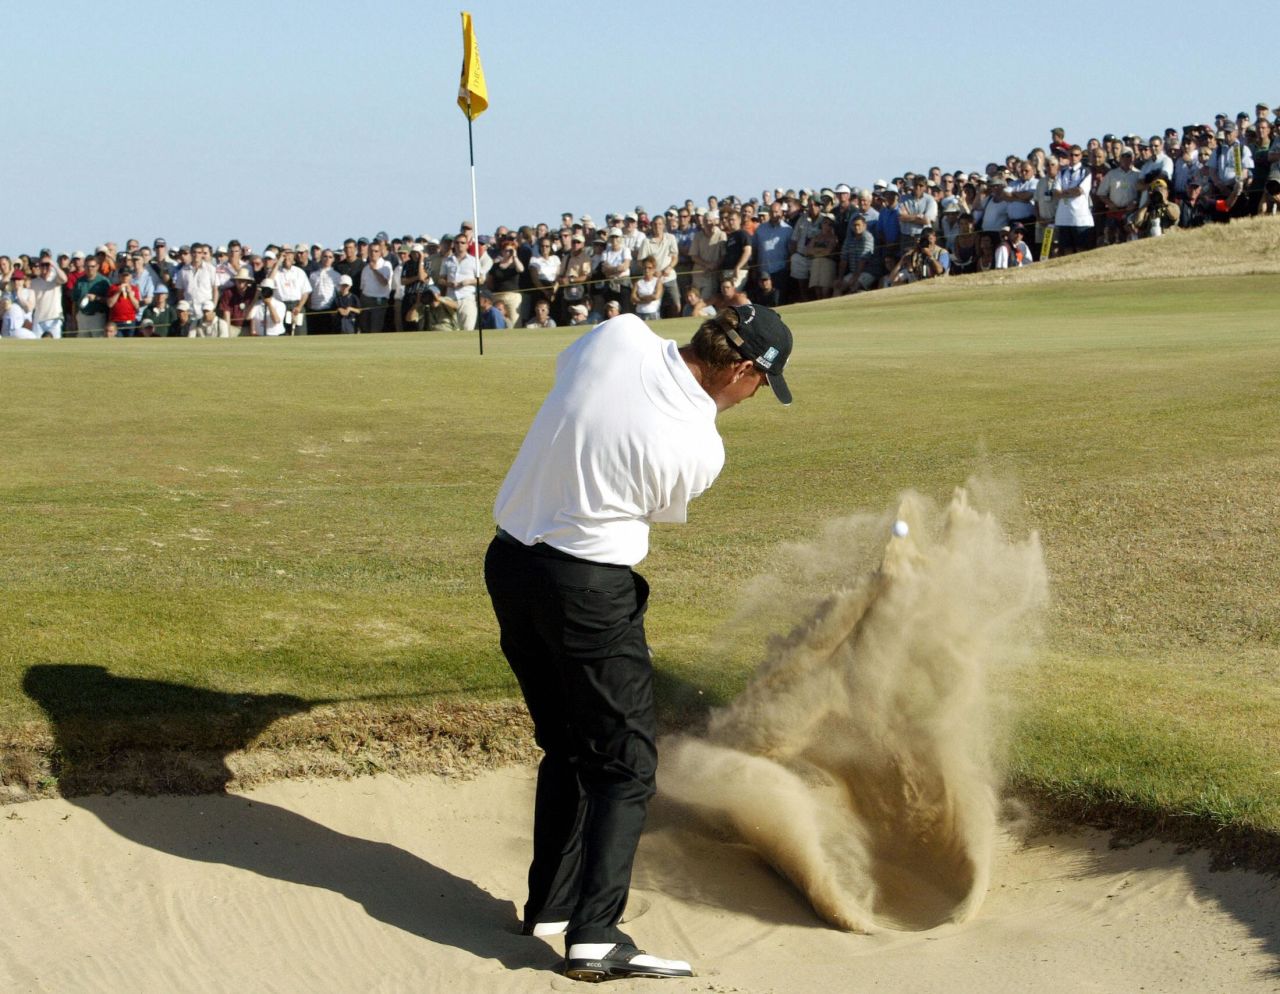 <strong>Thomas Bjorn digs his way out of a hole, 2003 -- </strong>Leading by two strokes with three holes to play <a href="https://www.theopen.com/latest/thomas-bjorn-iconic-open-moments" target="_blank" target="_blank">at Royal St George's in 2003</a>, Thomas Bjorn had one hand on the Claret Jug. Then he took a trip to the beach -- more specifically, a bunker on the par-three 16th. It took the Dane three shots to escape the sand trap and he carded a double bogey. Another dropped shot on the 17th and the dream was over. <br />